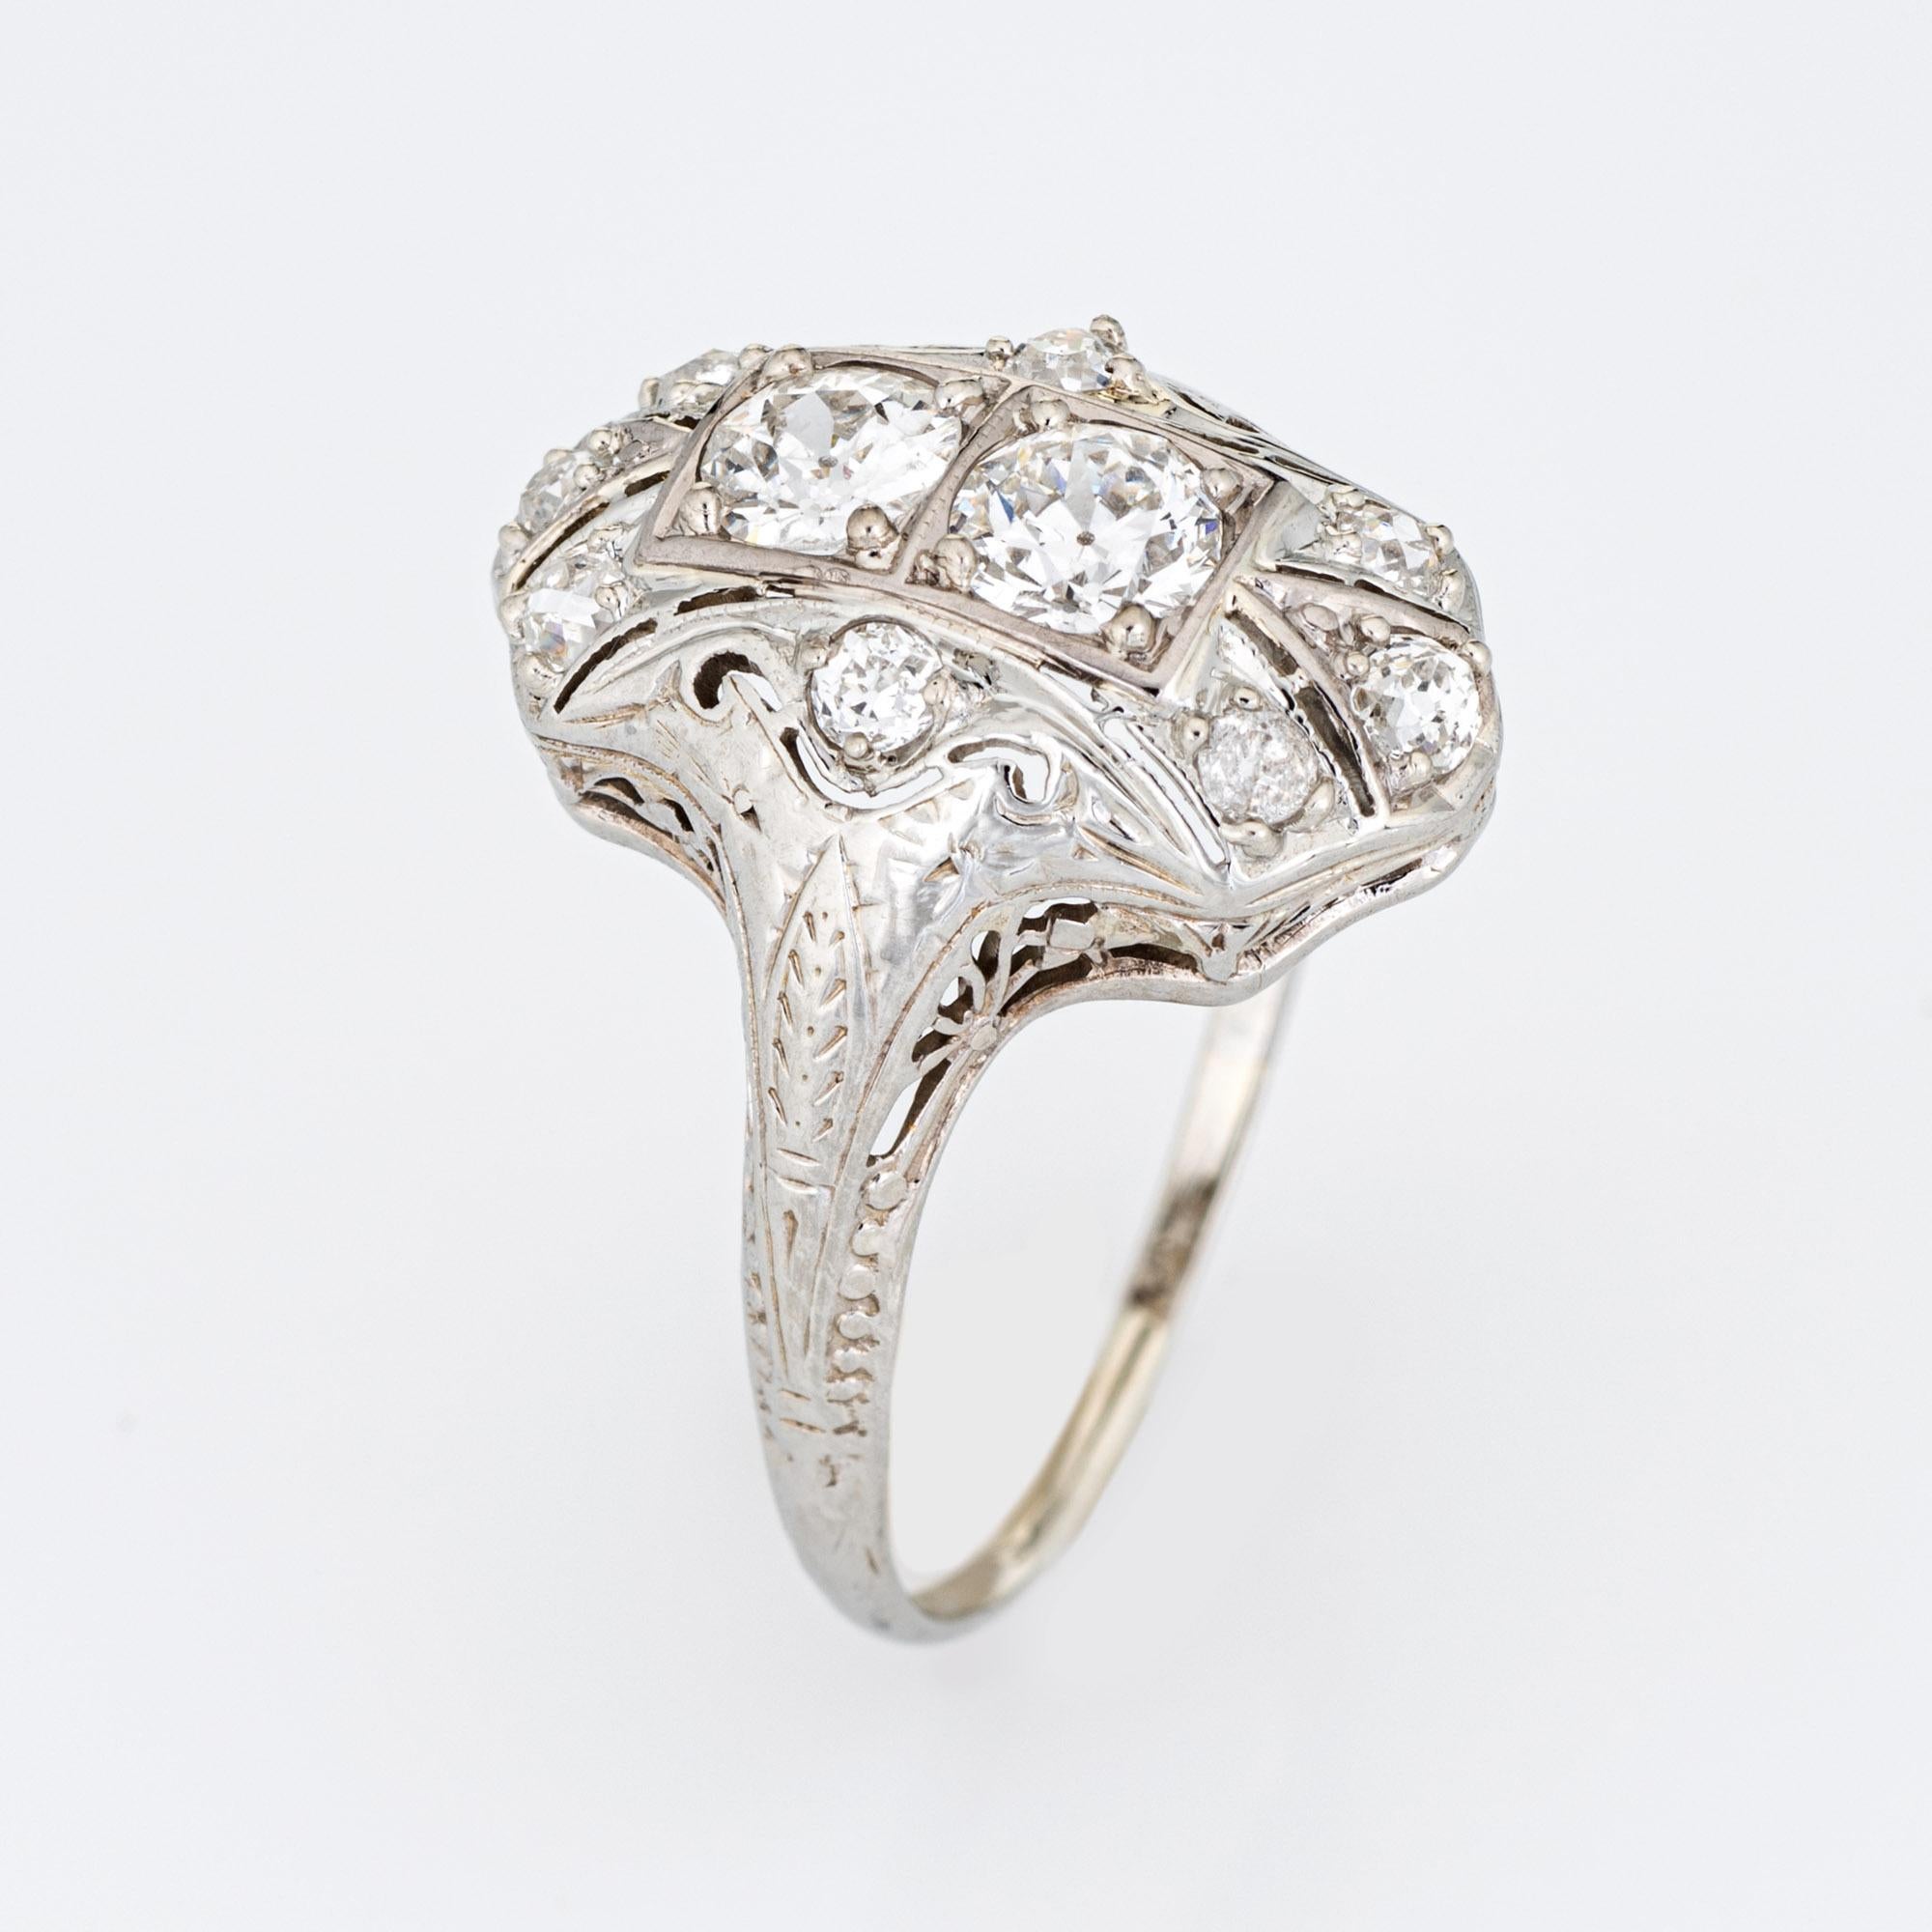 Elegant & finely detailed Belais Art Deco era ring (circa 1920s to 1930s) crafted in 14k white gold. 

Two centrally mounted old European cut diamonds are estimated at 0.48 carats each. A further 8 old mine cut diamonds total an estimated 0.42